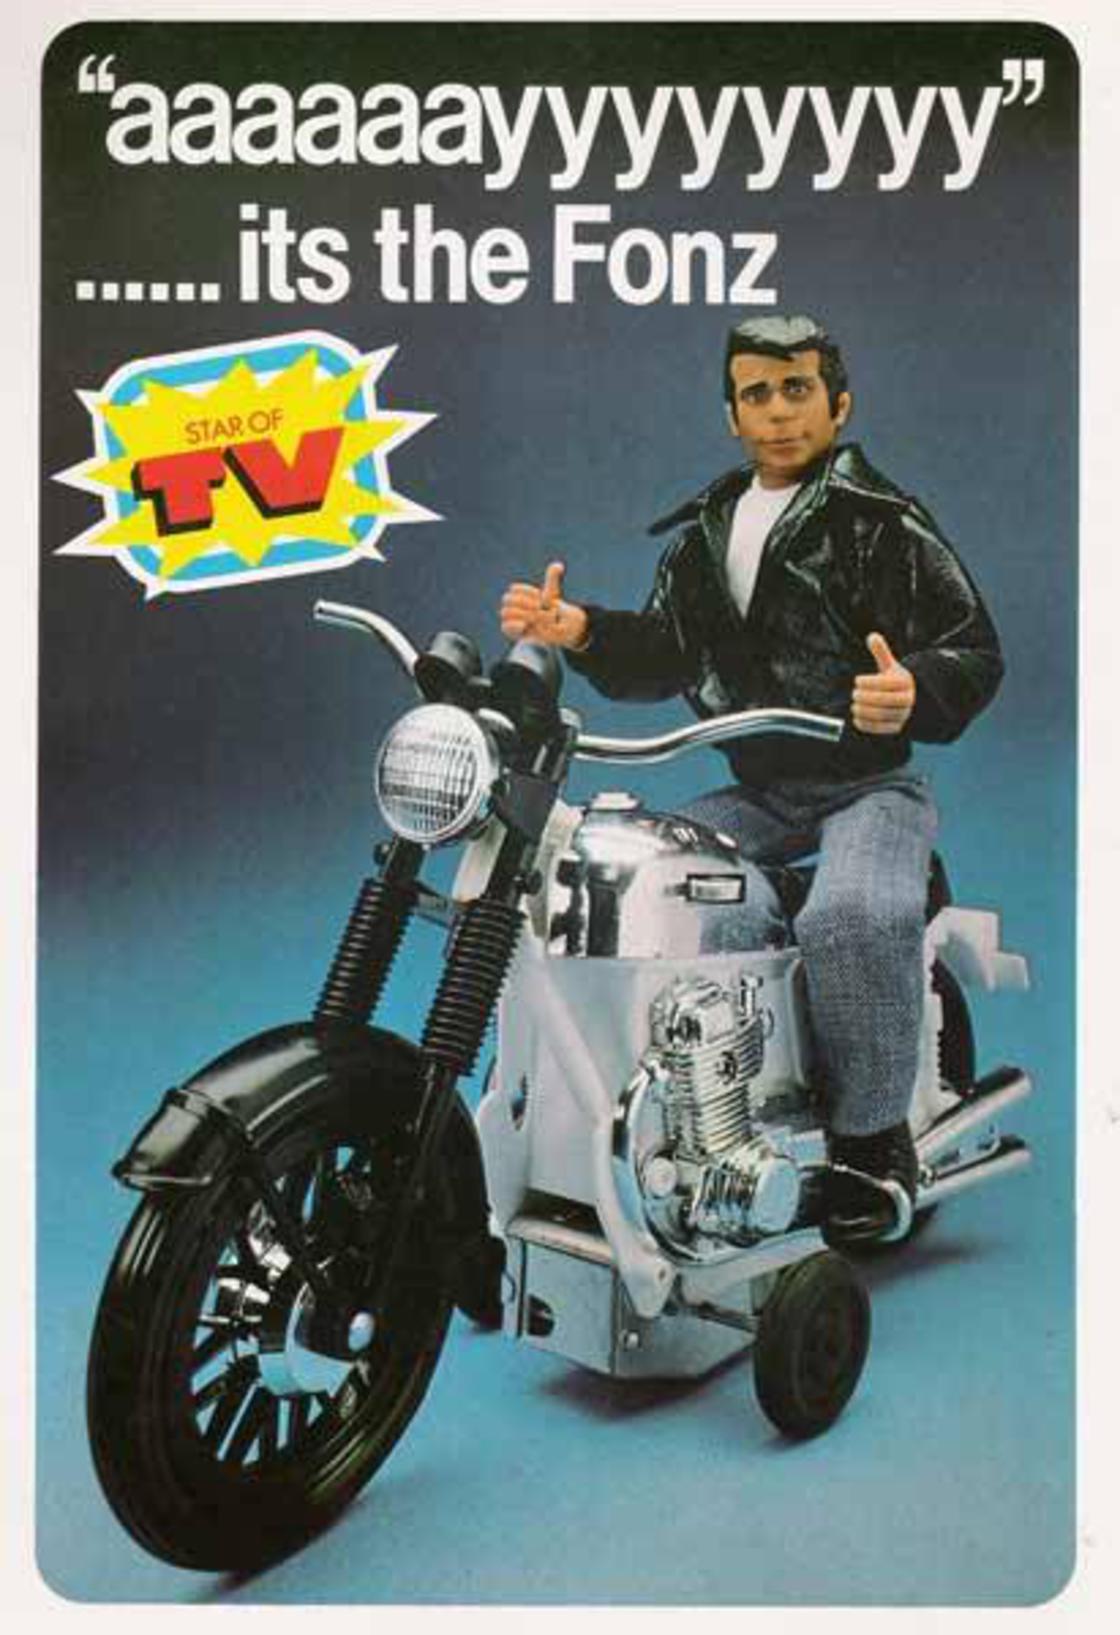 happy days toys vintage - ......its the Fonz Star Of